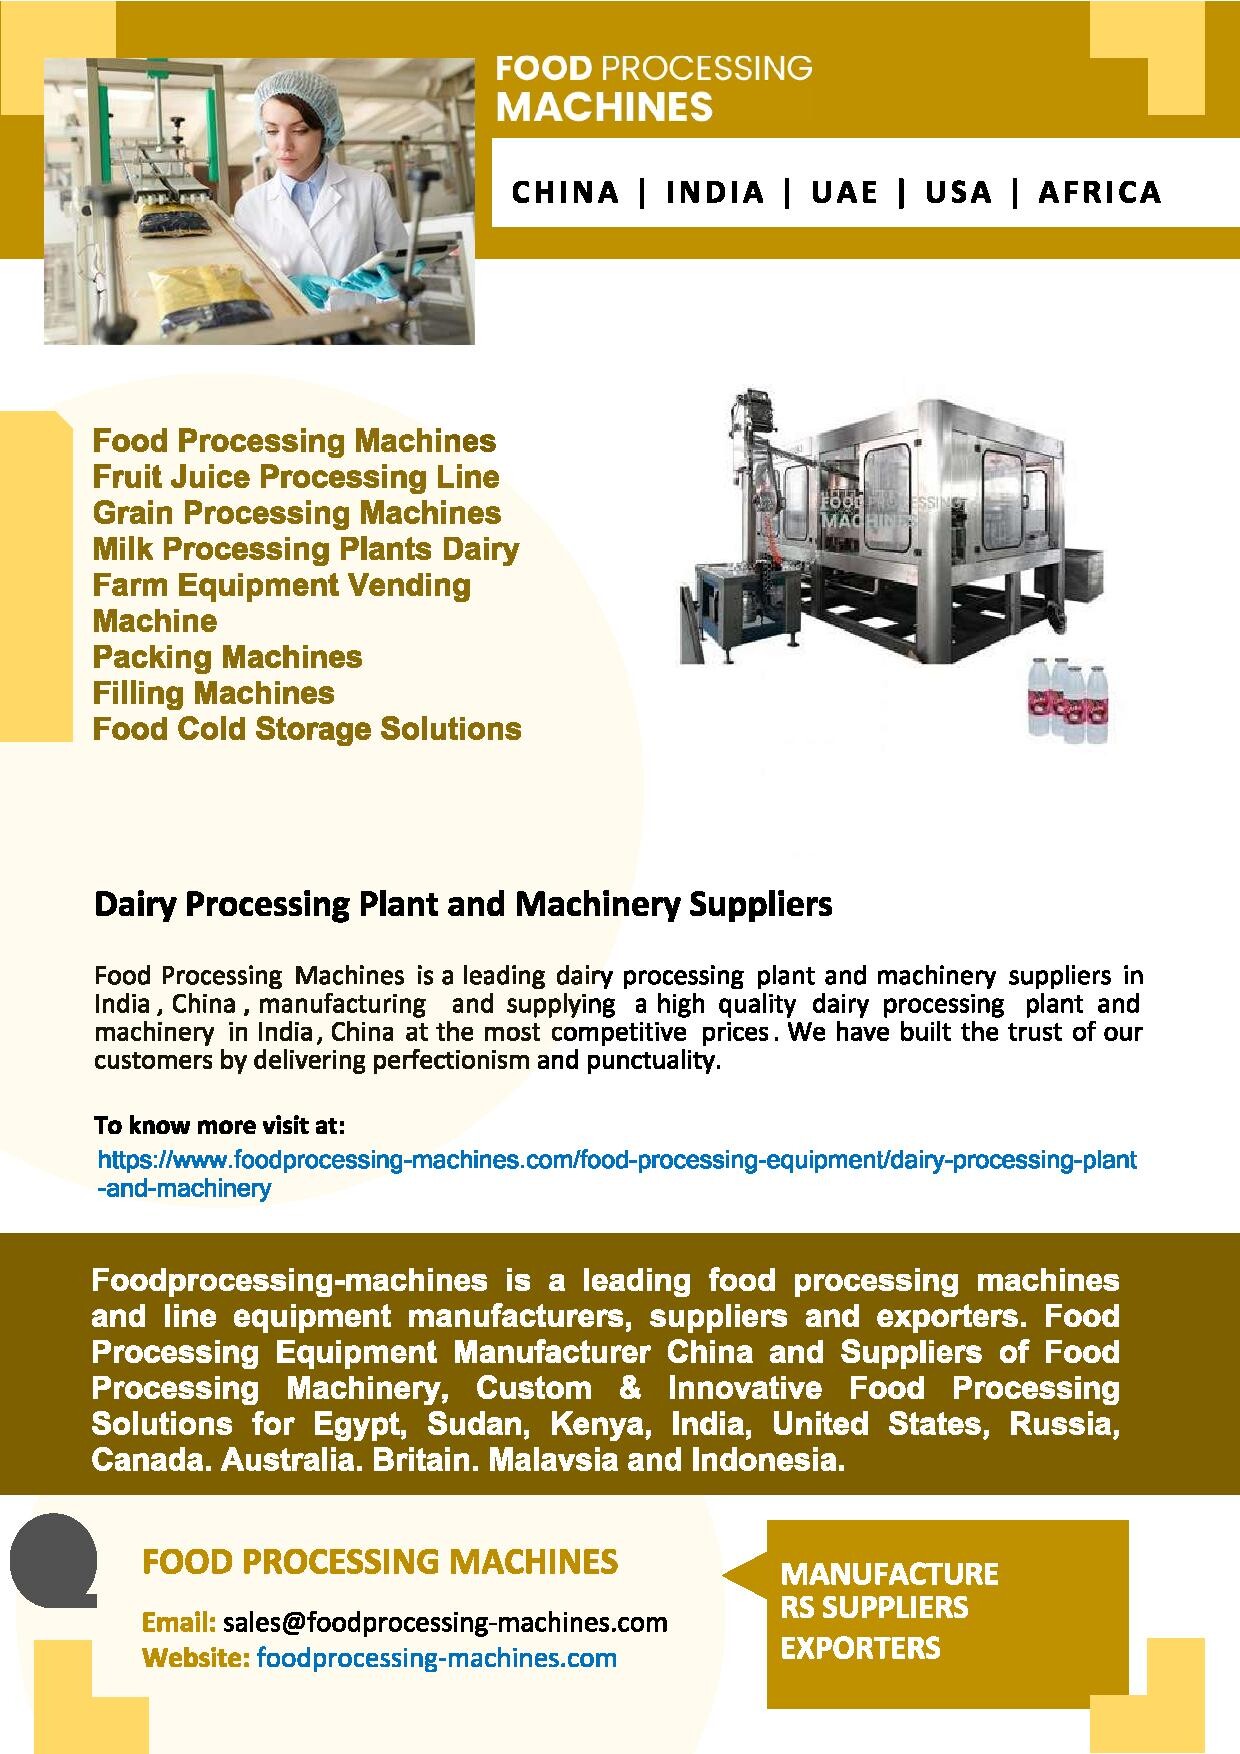 https://cdnb.artstation.com/p/assets/images/images/055/940/065/large/foodprocessing-machines-dairy-processing-plant-and-machinery-suppliers.jpg?1668083391